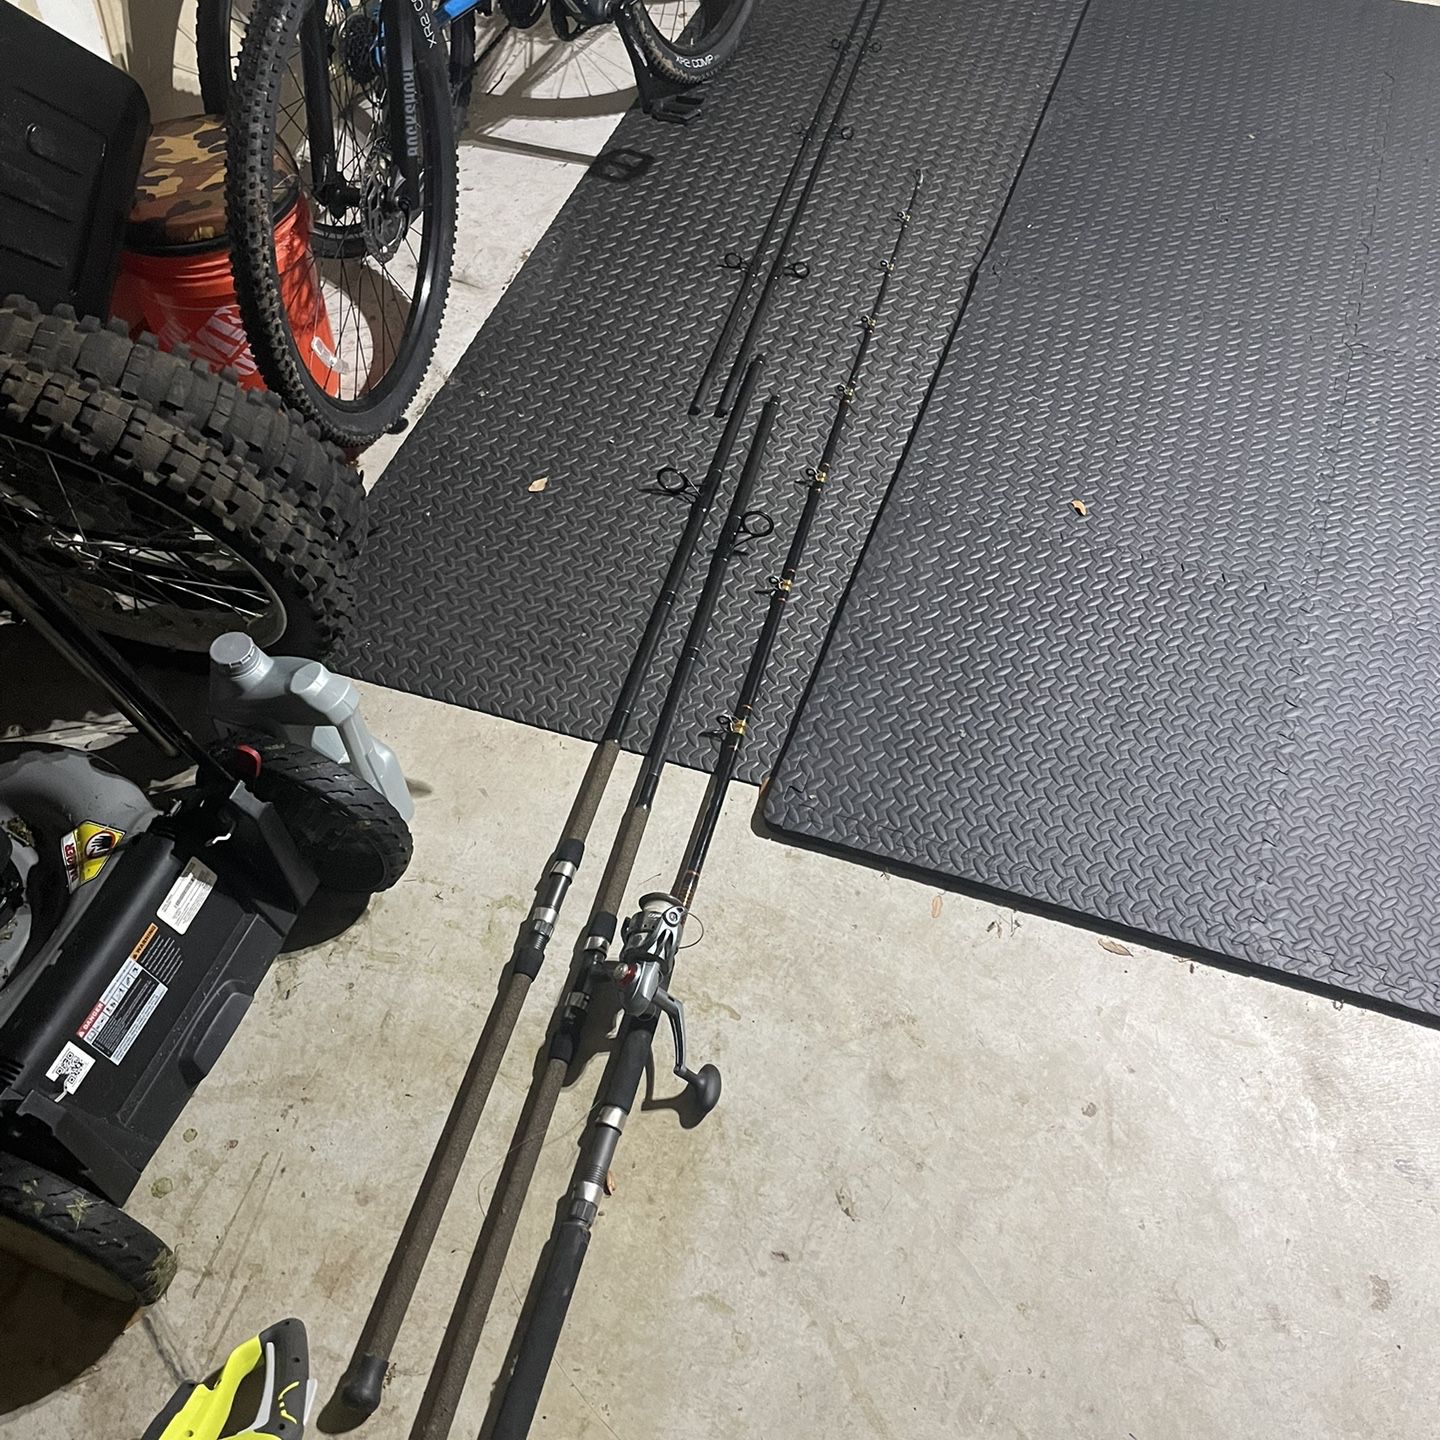 Saltwater Fishing Poles And Reel